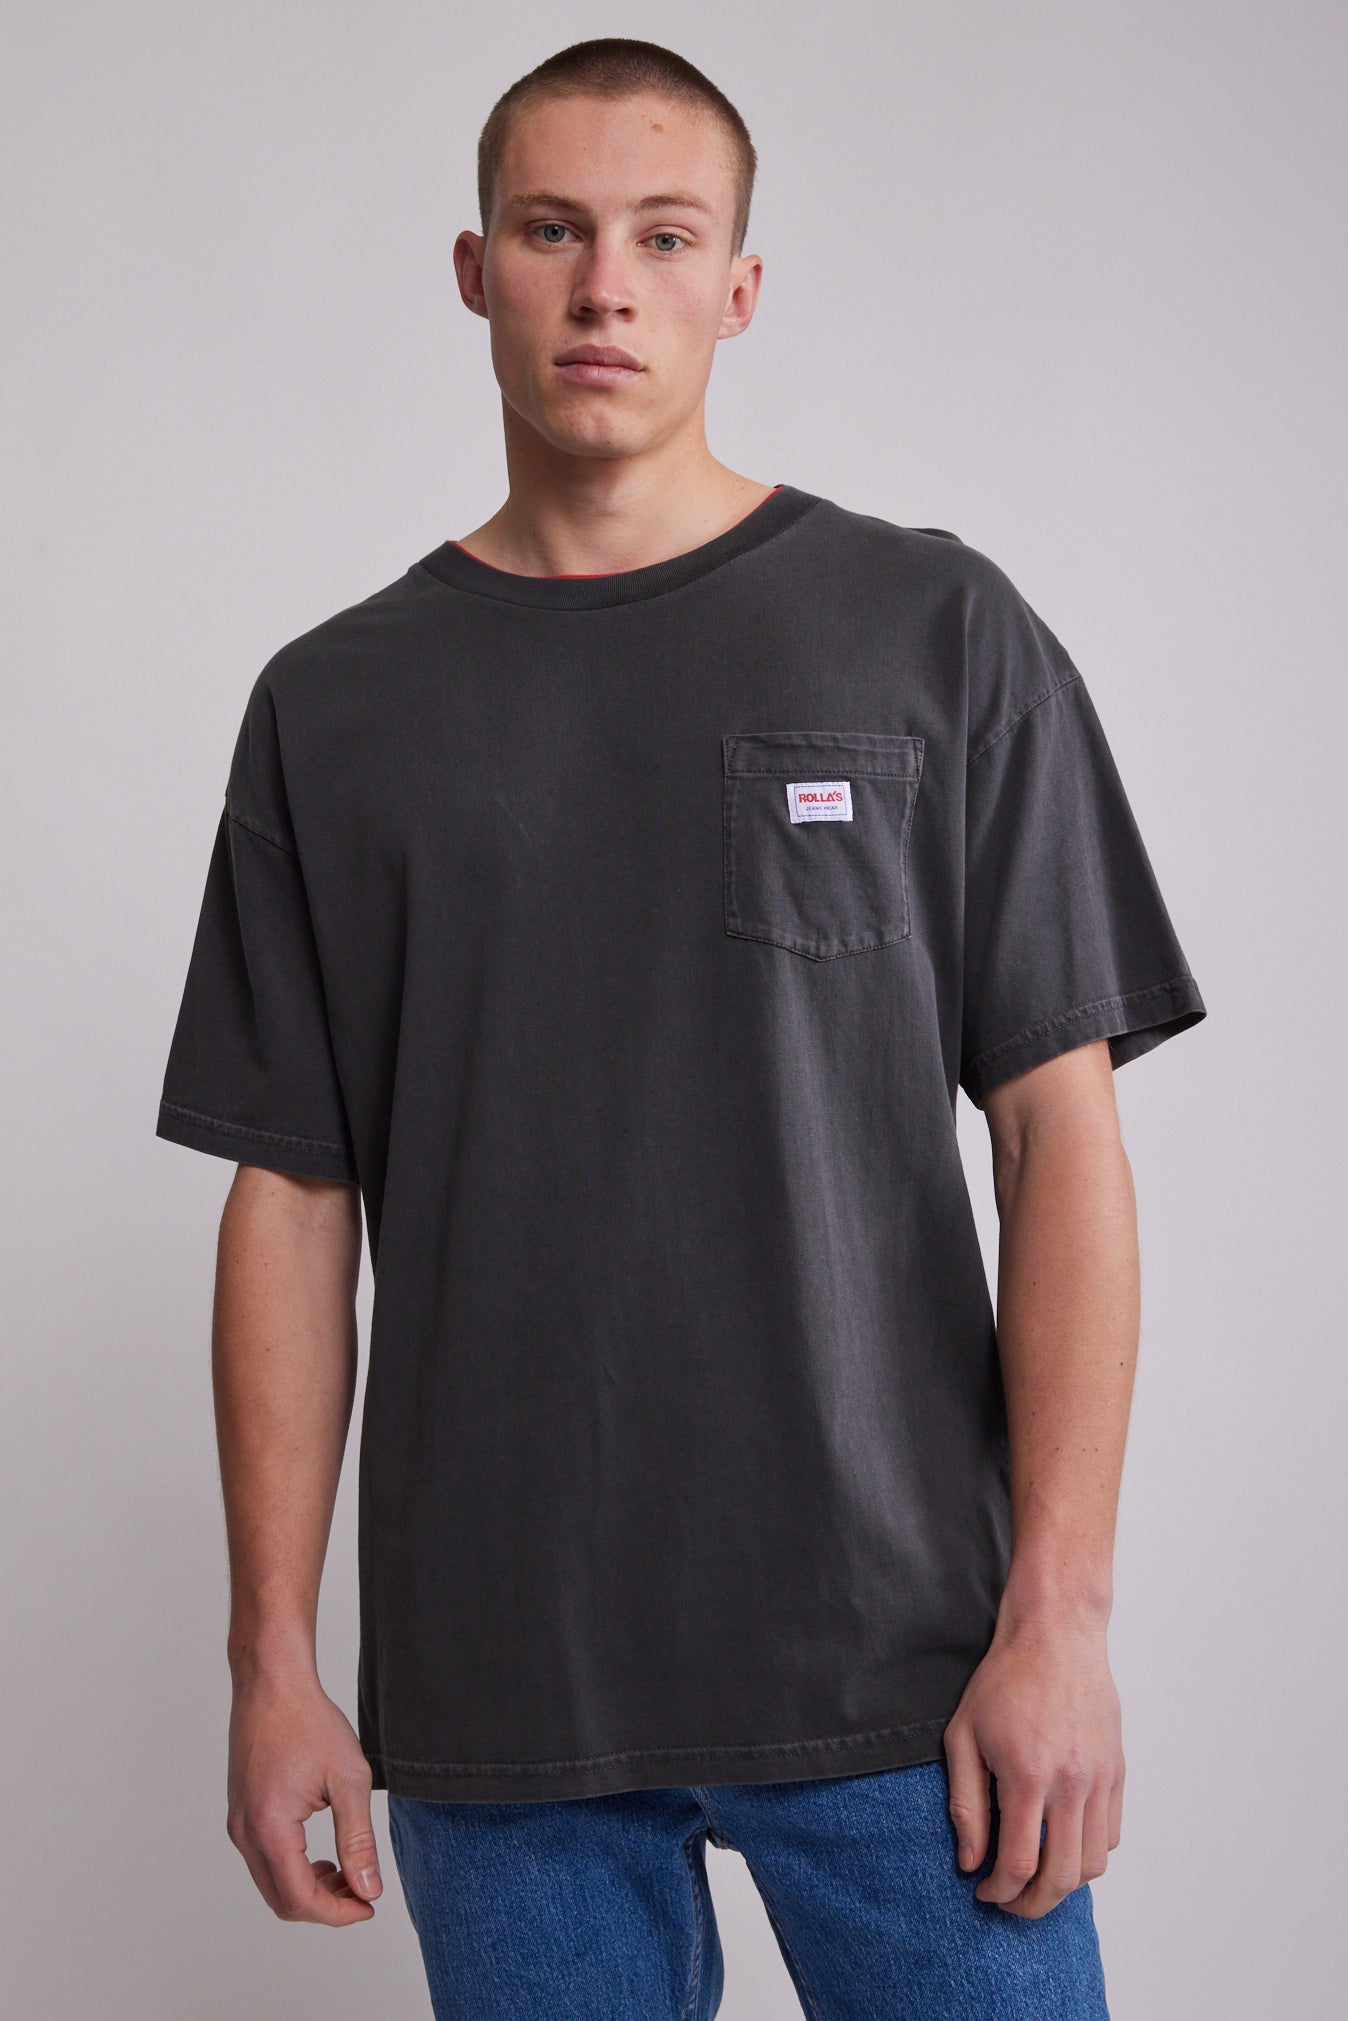 https://www.northbeach.co.nz/content/products/double-rib-pocket-tee-vintage-black-1-ros33t13-063.jpg